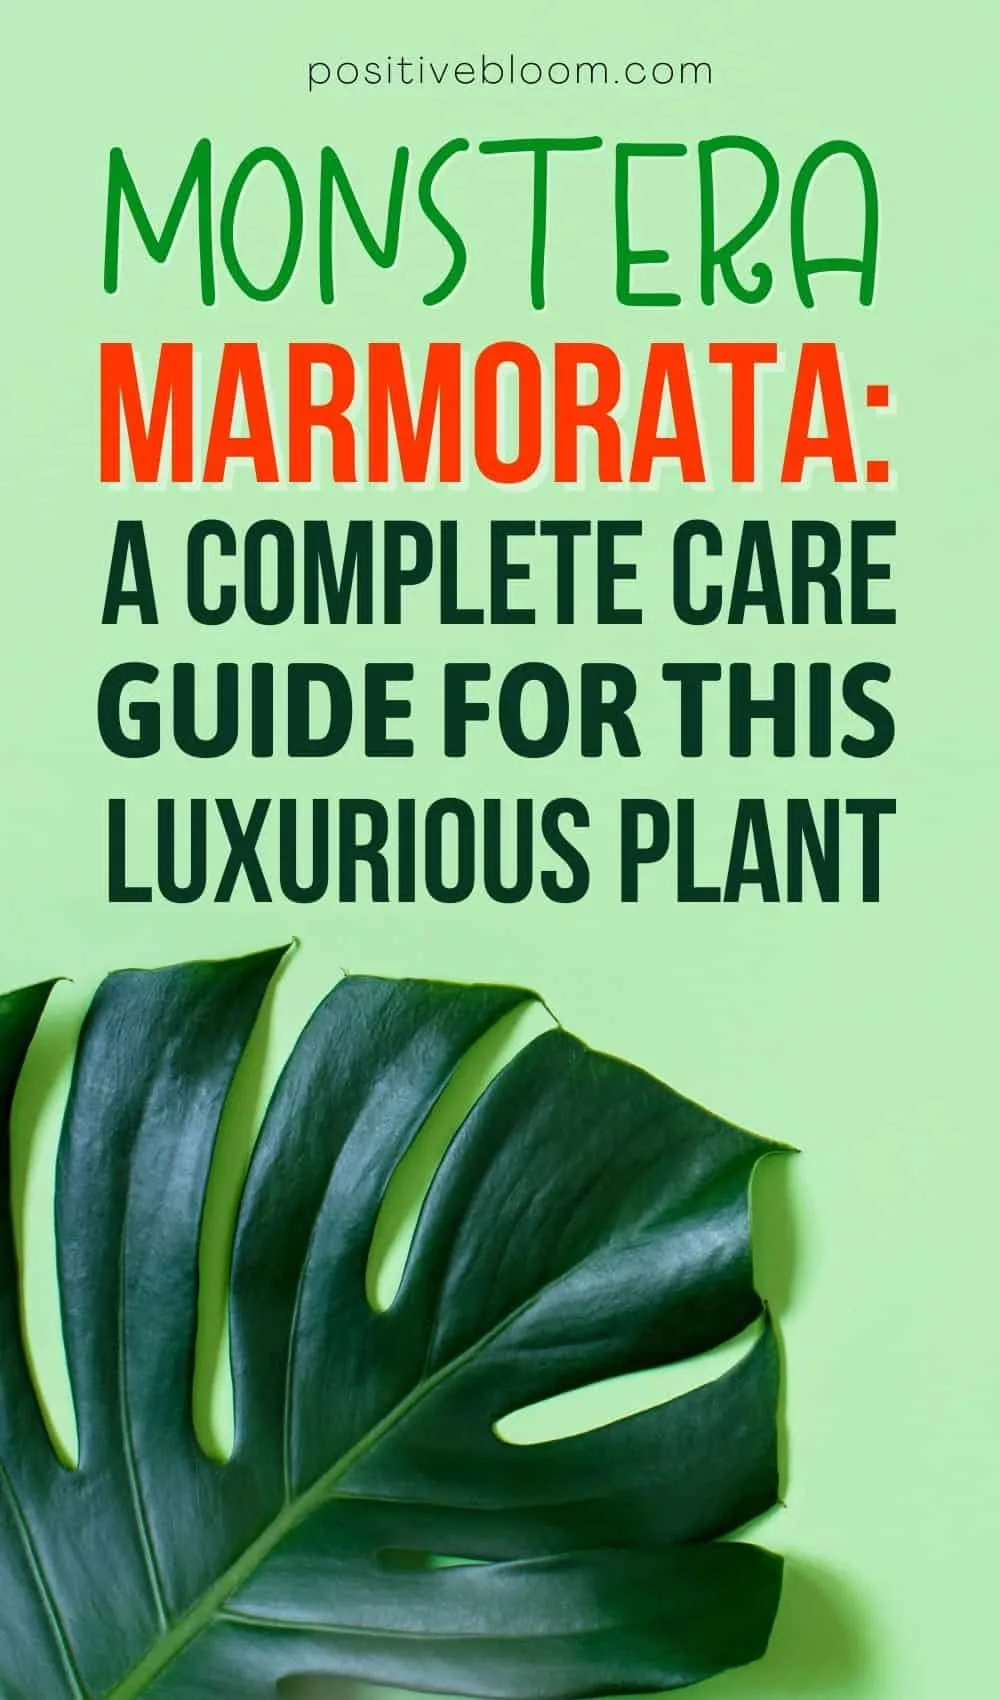 Monstera Marmorata A Complete Care Guide For This Luxurious Plant